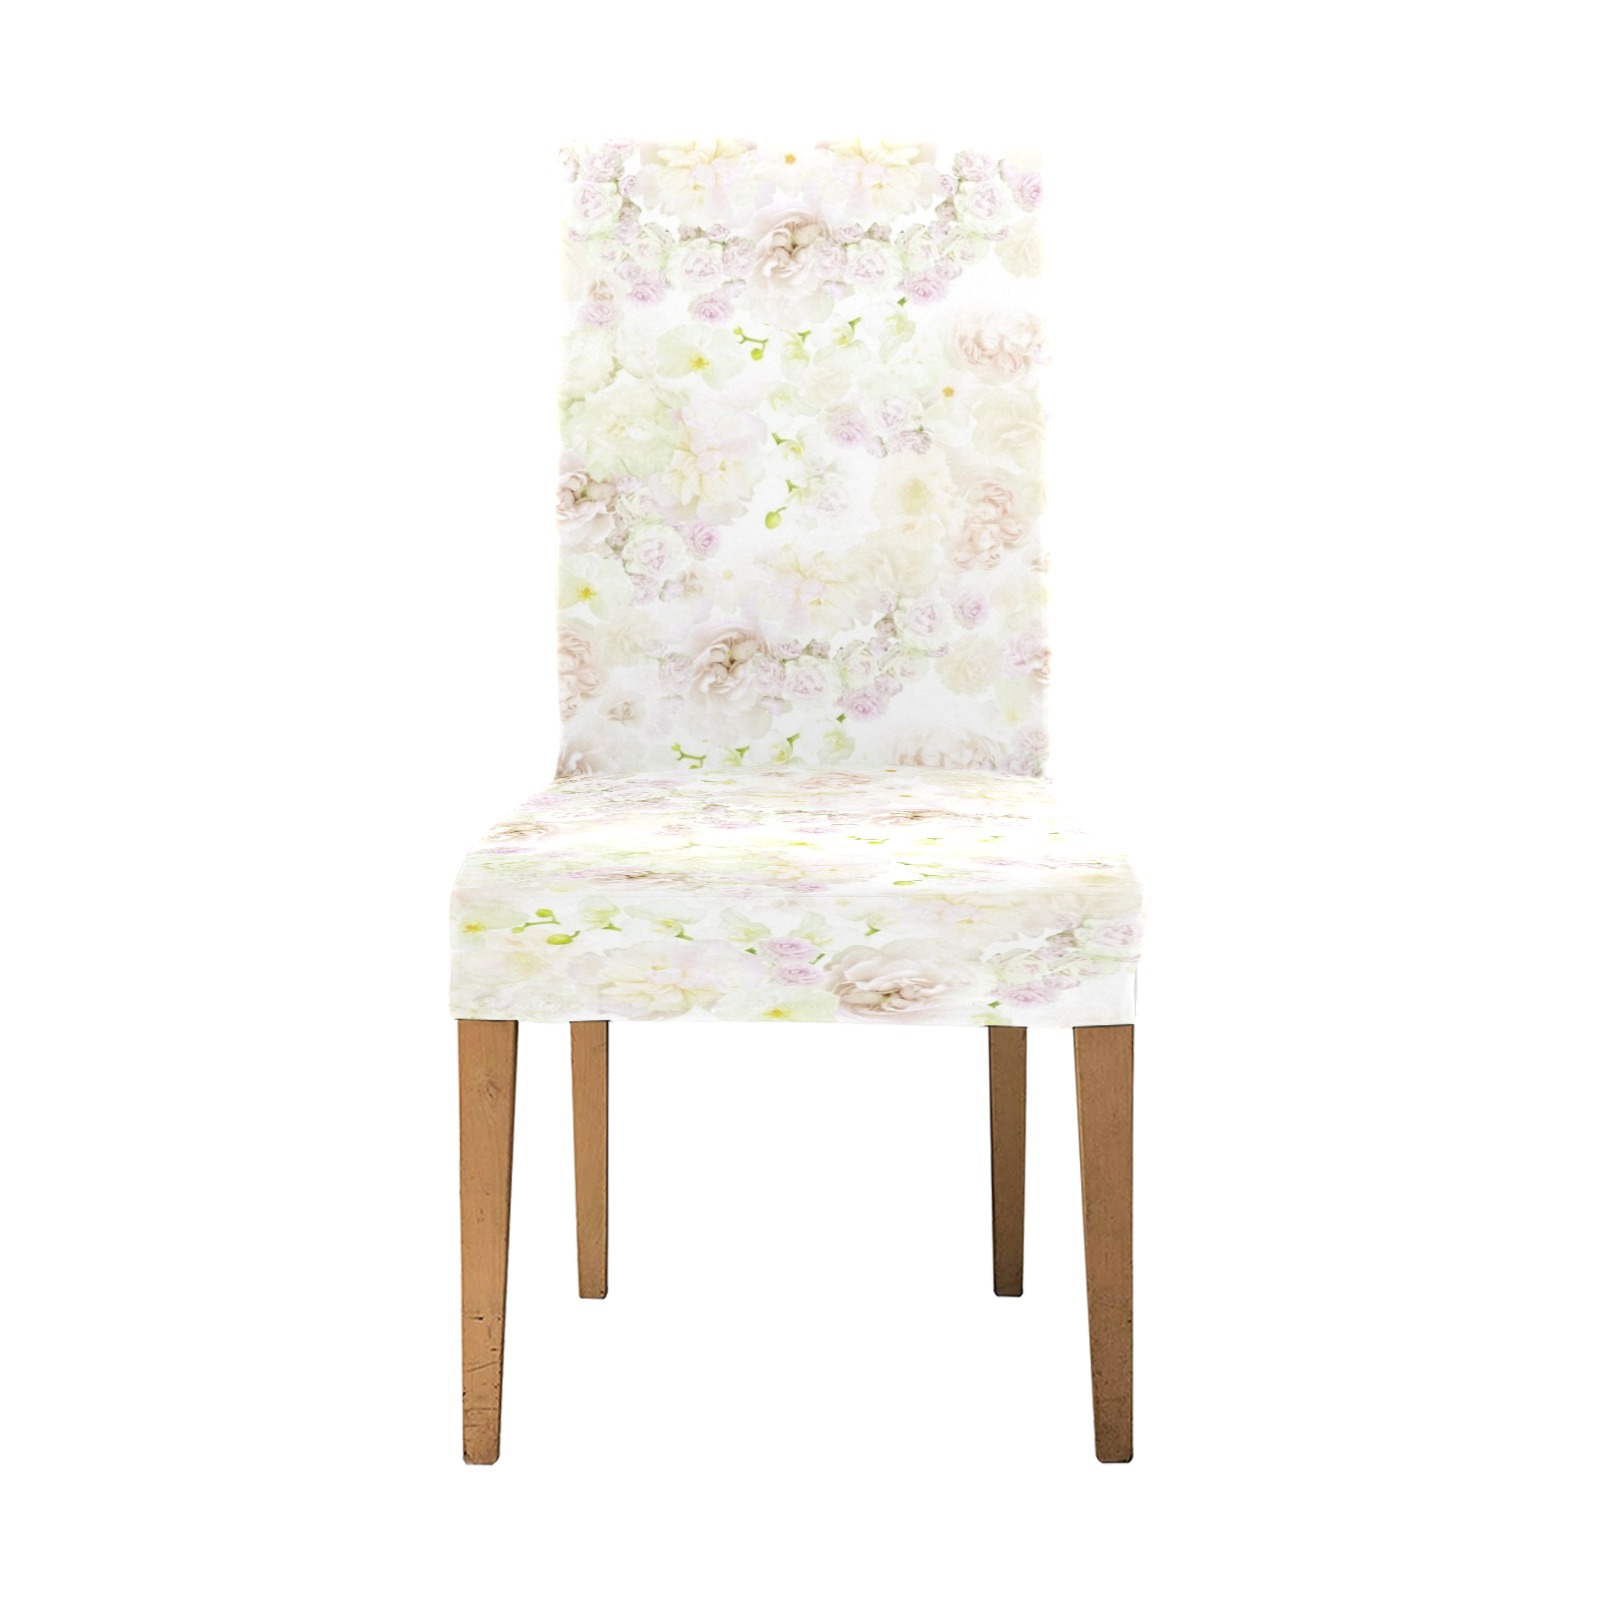 peonies flowers5 Removable Dining Chair Cover